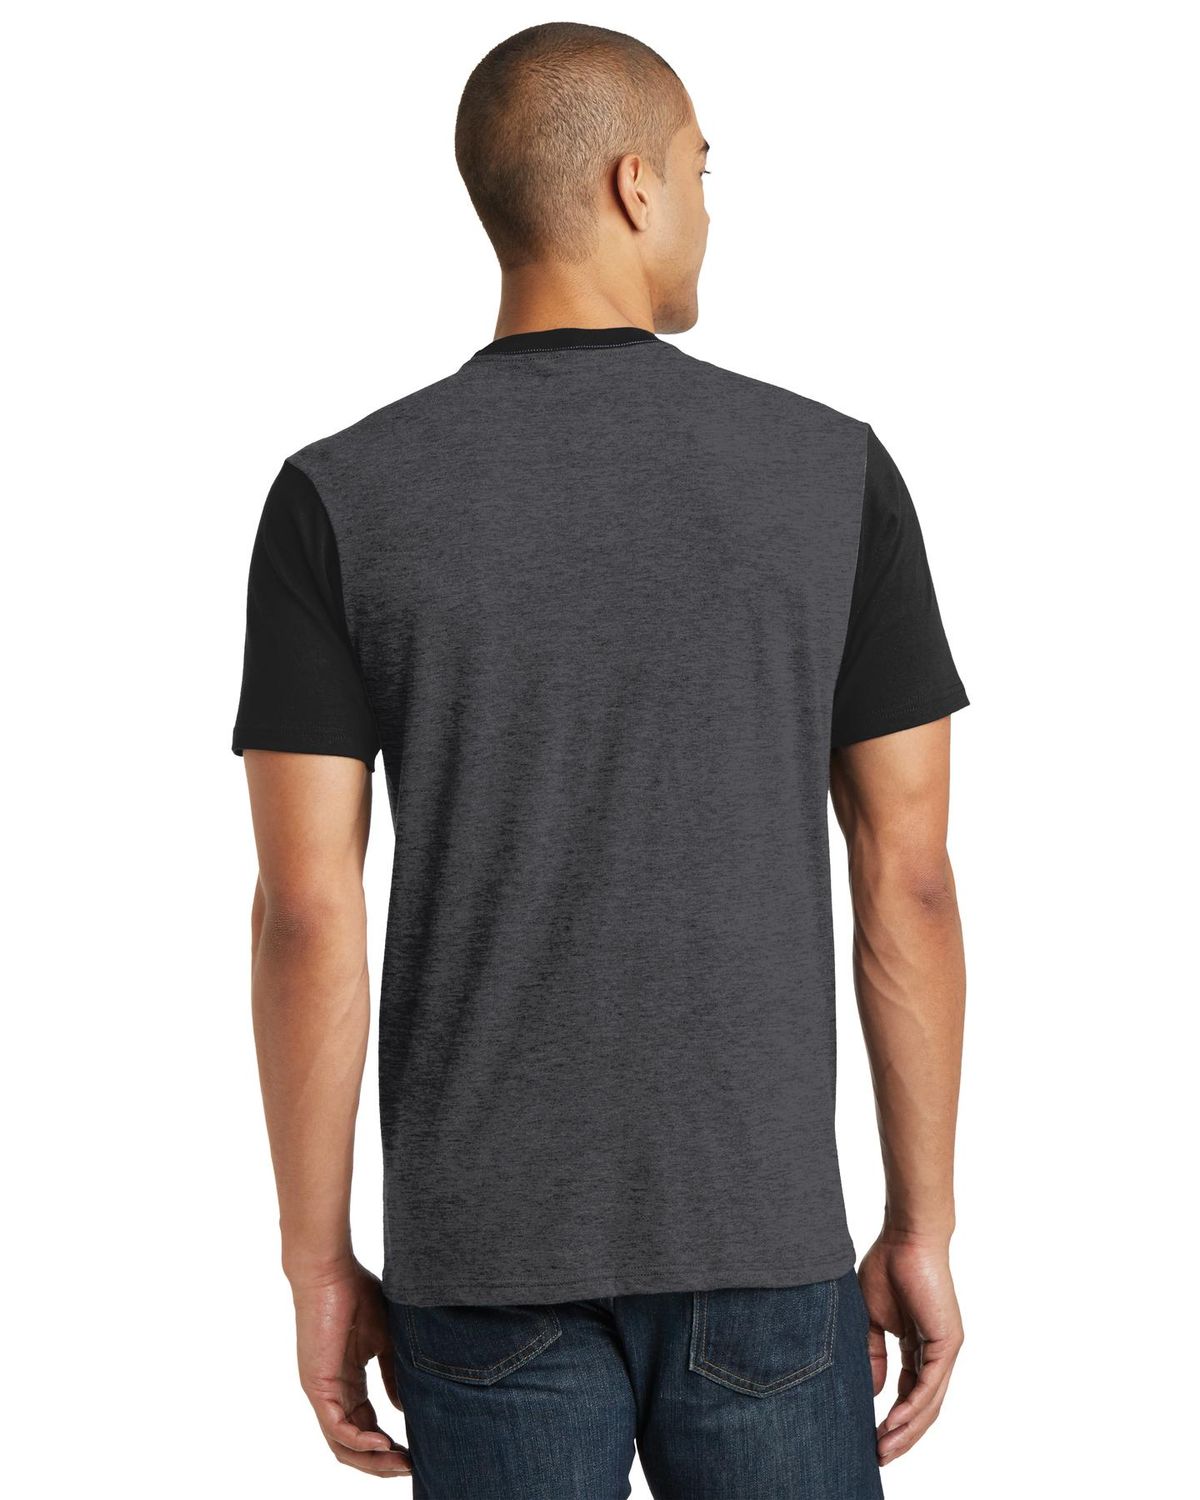 'District DT6000SP Young Mens Very Important Tee  With Contrast Sleeves And Pocket.'